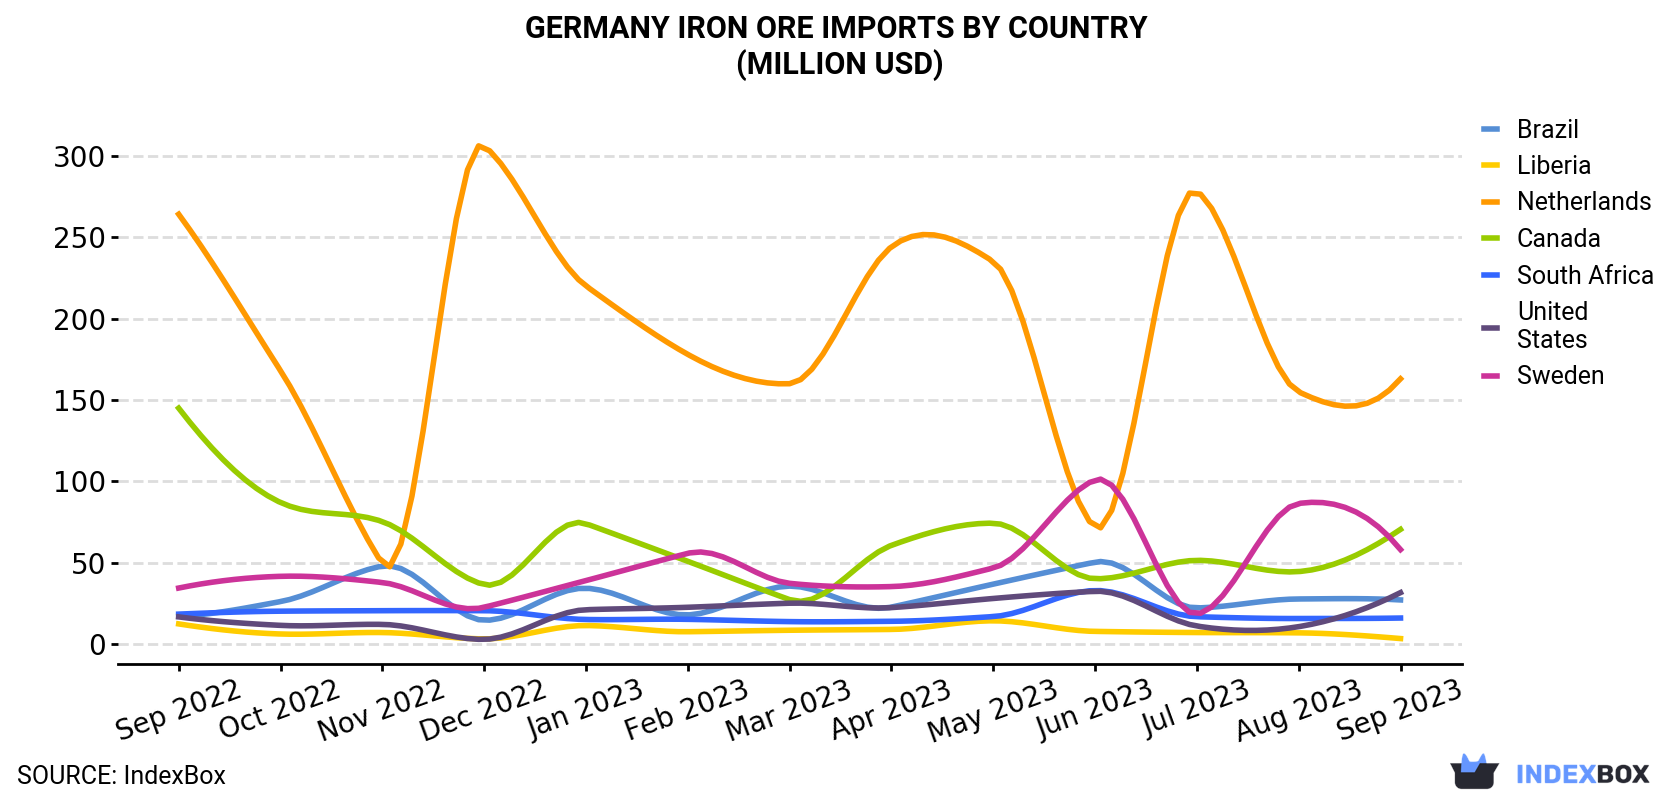 Germany Iron Ore Imports By Country (Million USD)